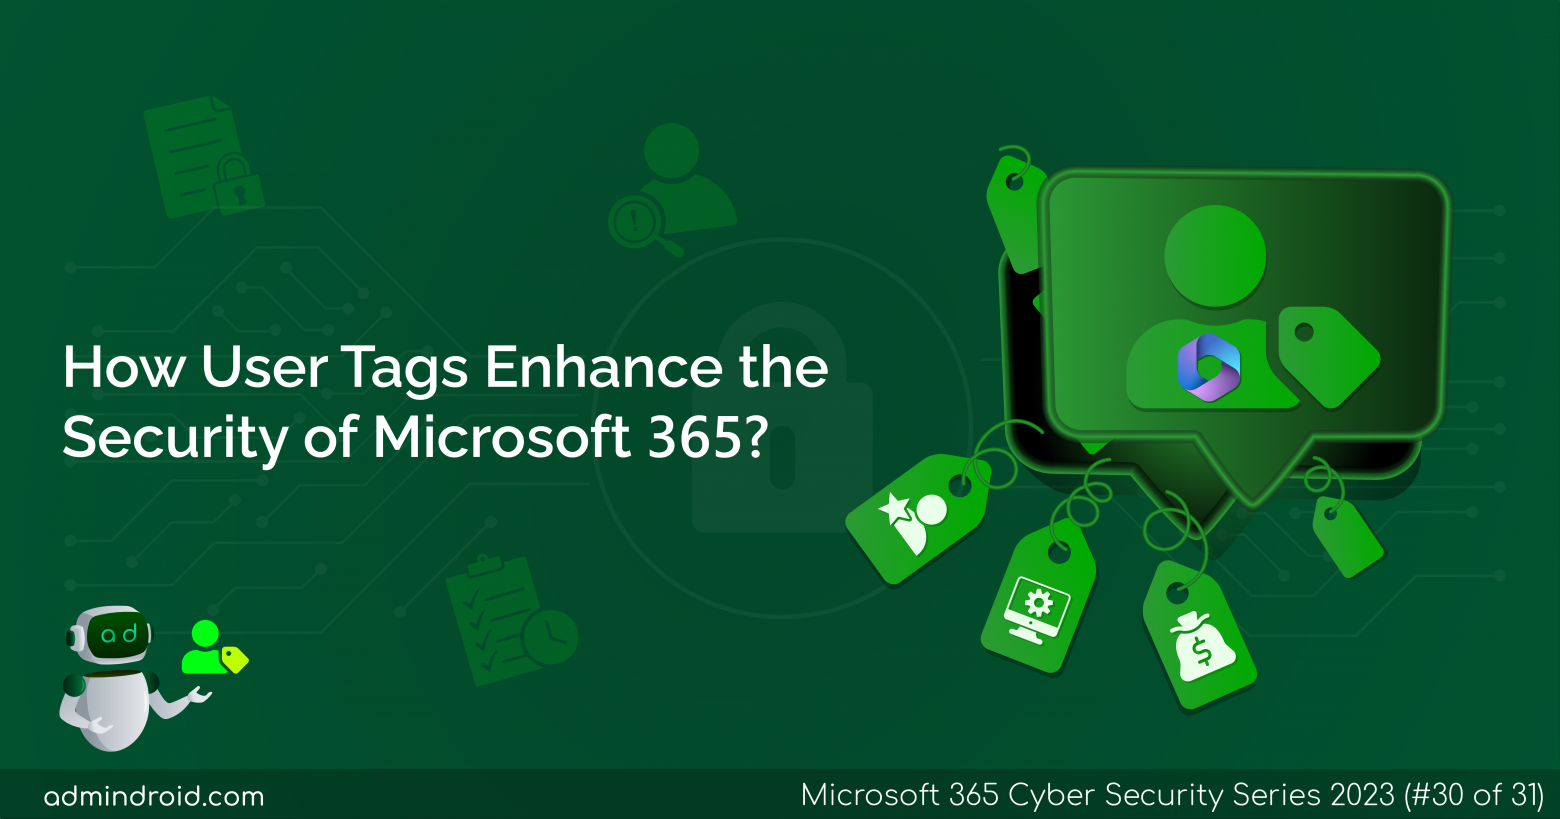 How User Tags Enhance the Security of Microsoft 365